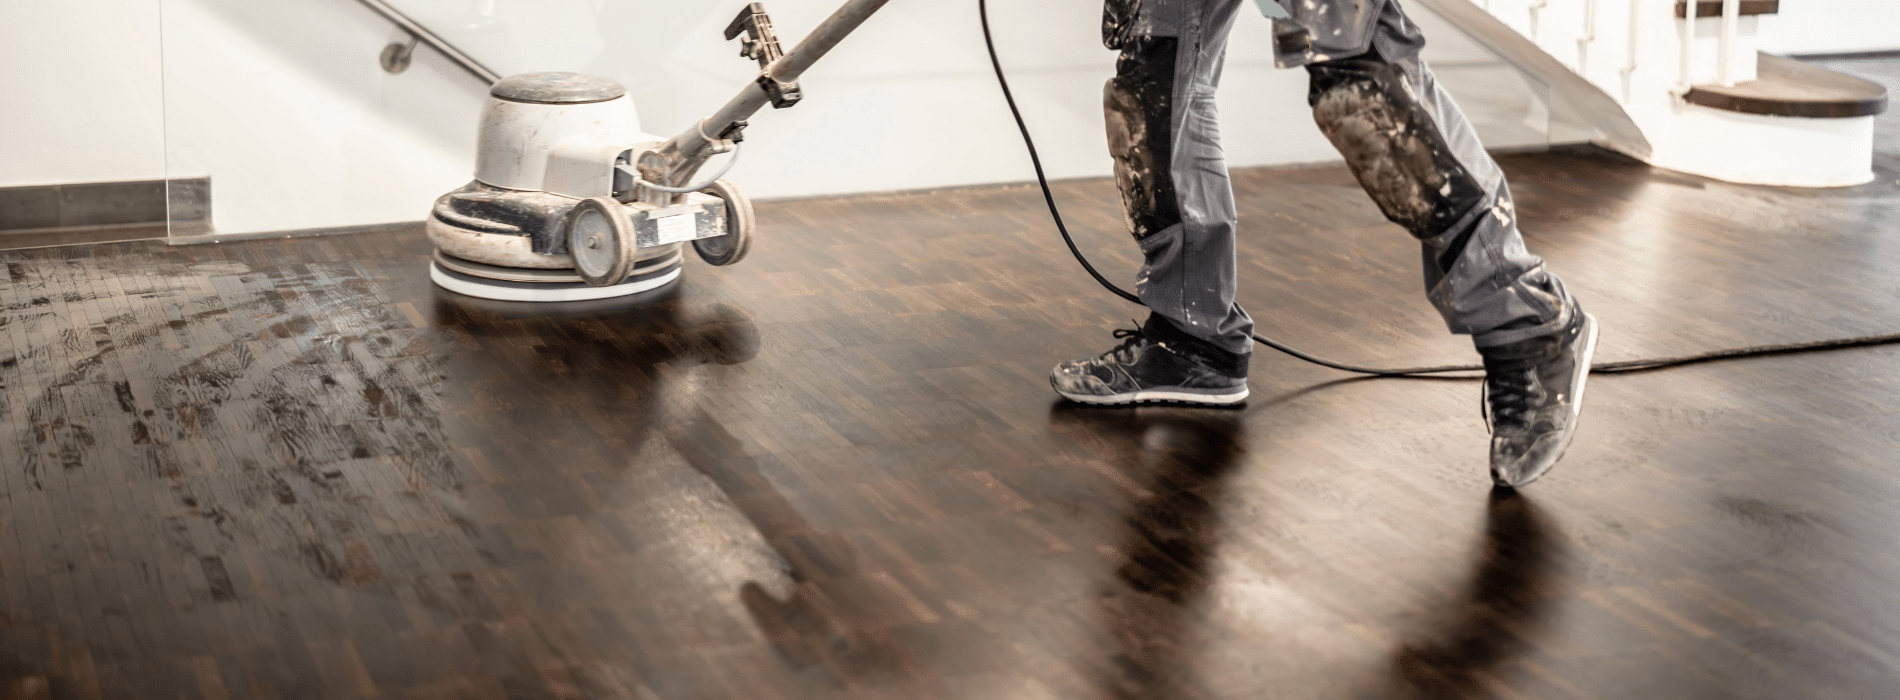 In Euston, WC1, Mr Sander® use a Bona FlexiSand 1.5 (Ø 407 mm, 1.5 kW, 230V, 50/60 Hz) buffer sander with dust extraction and HEPA filter for powerful, direction-free sanding, delivering clean and efficient results.